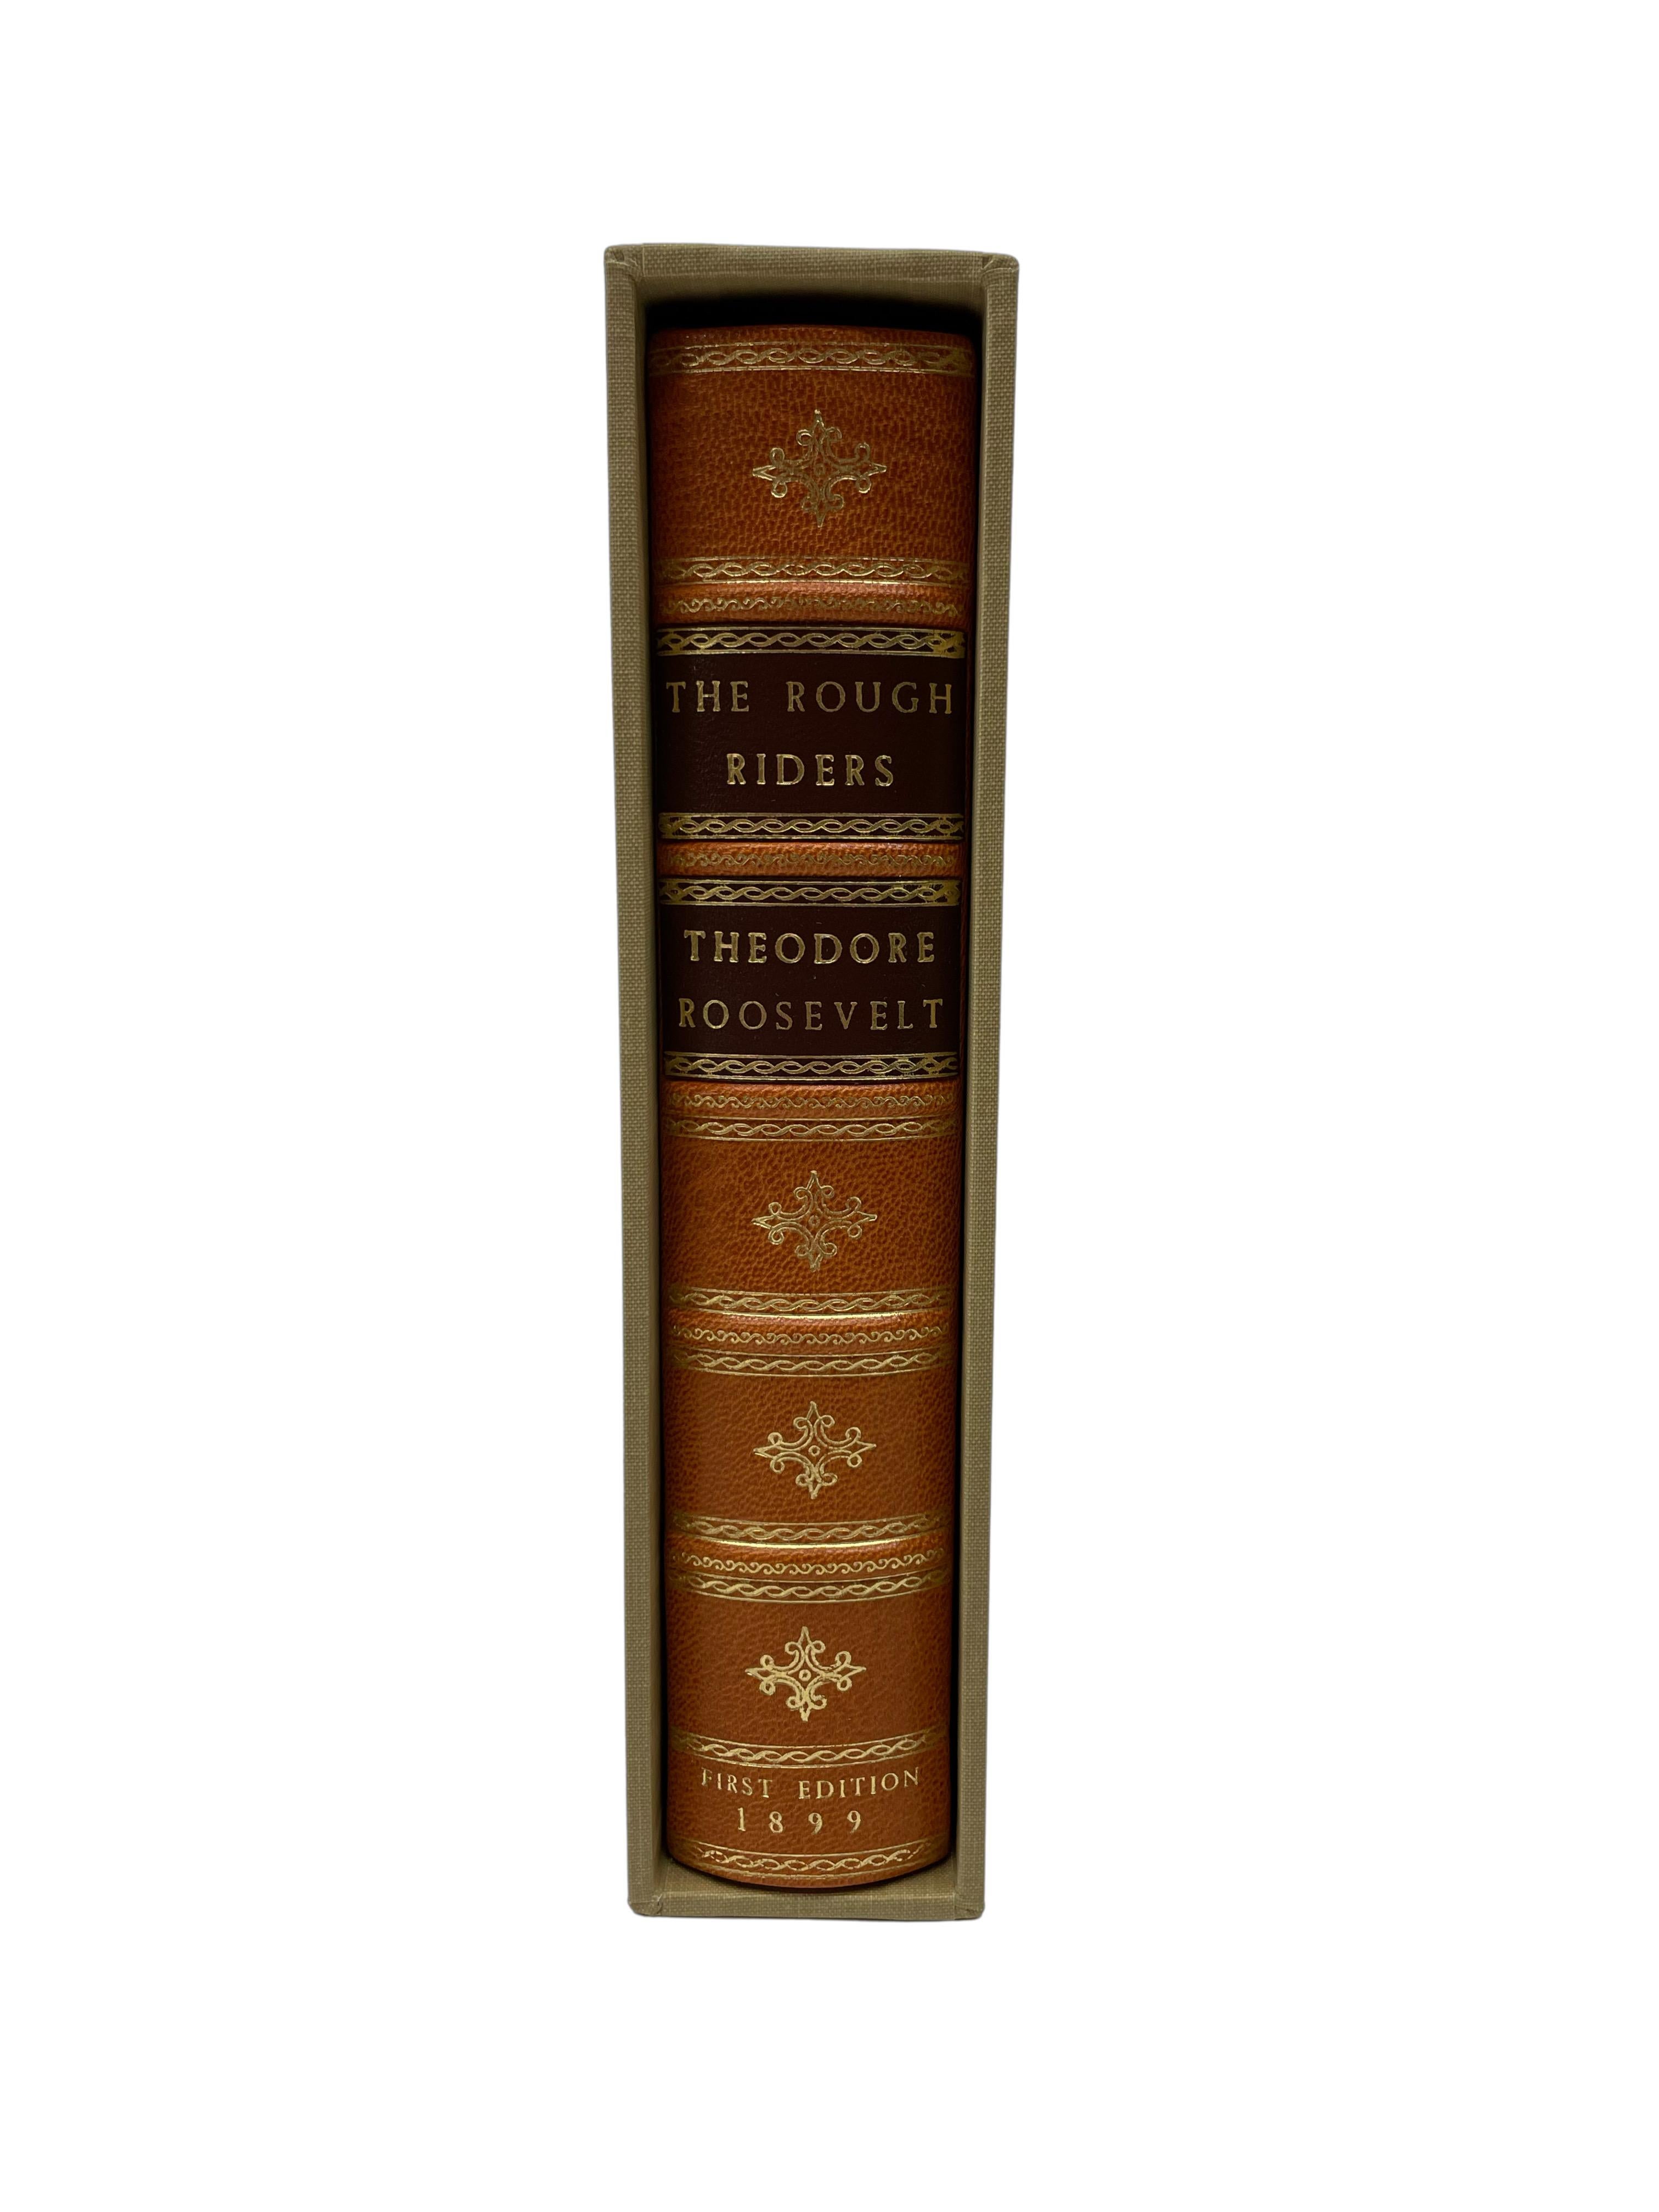 American Rough Riders by Theodore Roosevelt, First Edition, 1899